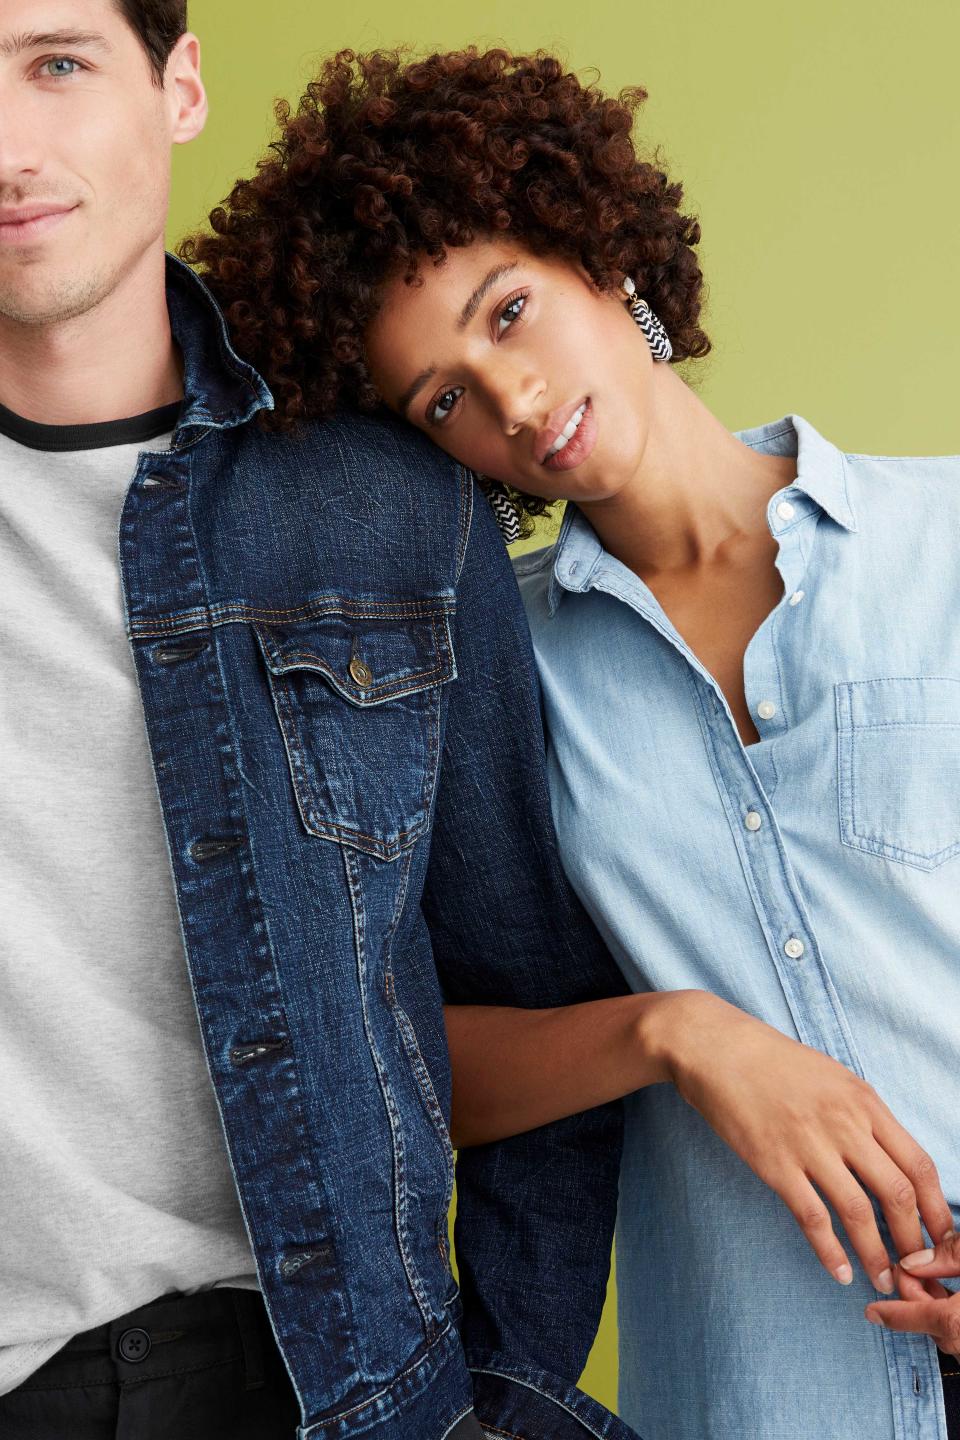 You can pick up denim jackets and chambray shirts from J.Crew’s Mercantile line on Amazon. (Photo: courtesy of Amazon)